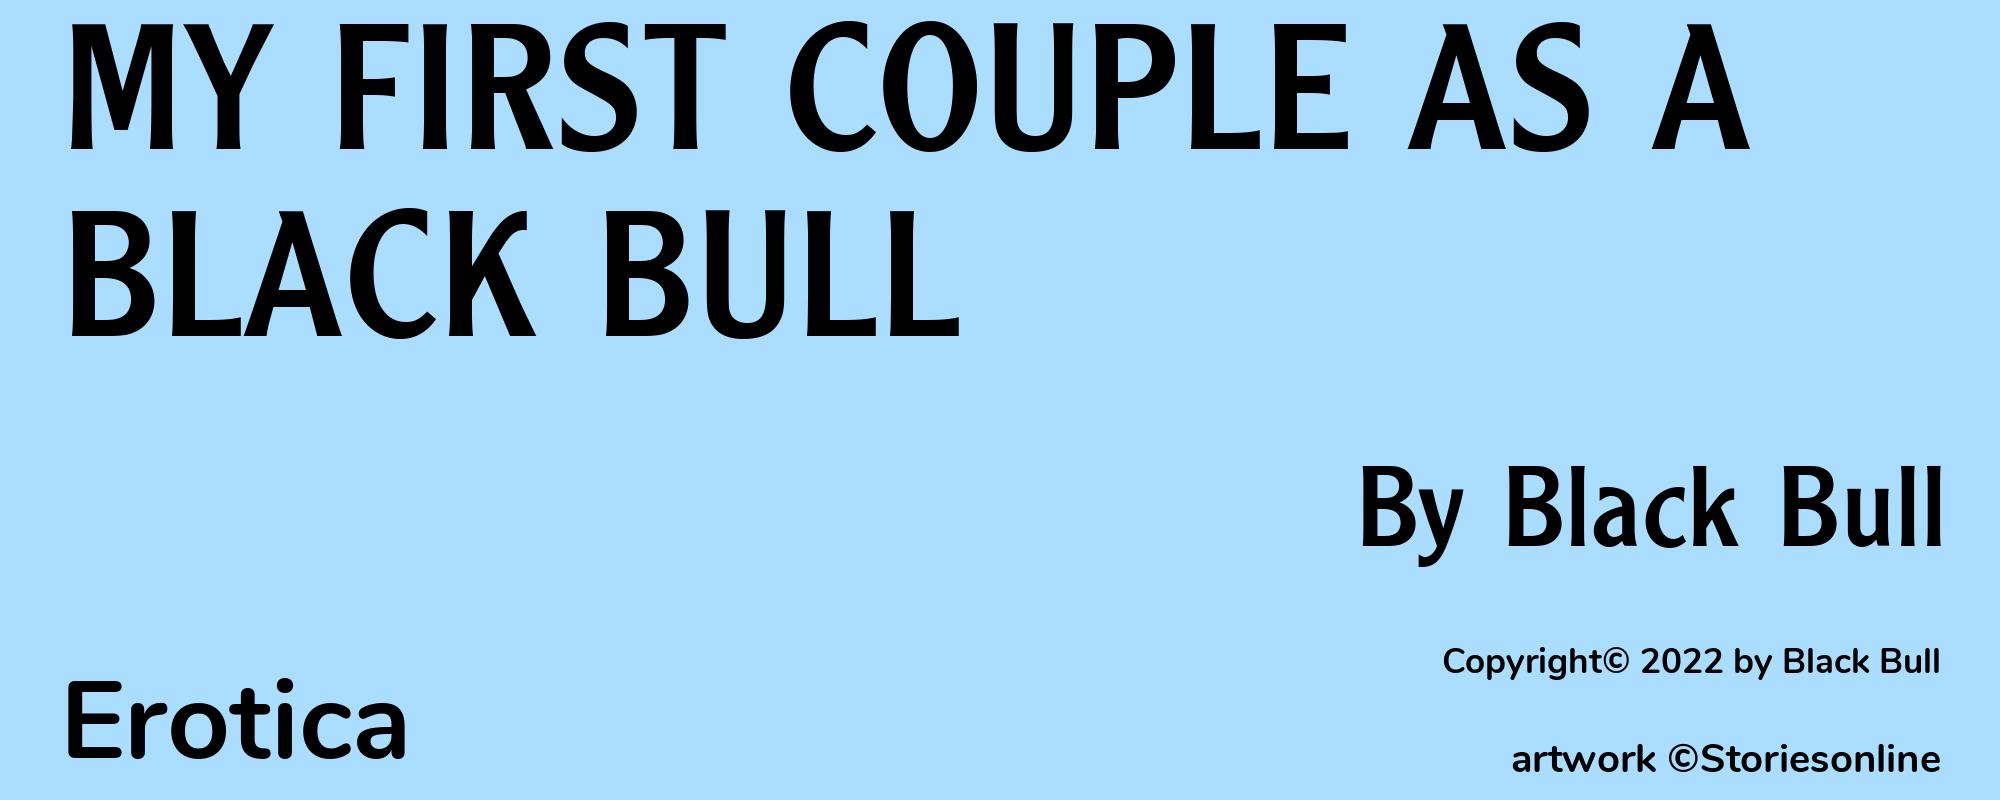 MY FIRST COUPLE AS A BLACK BULL - Cover